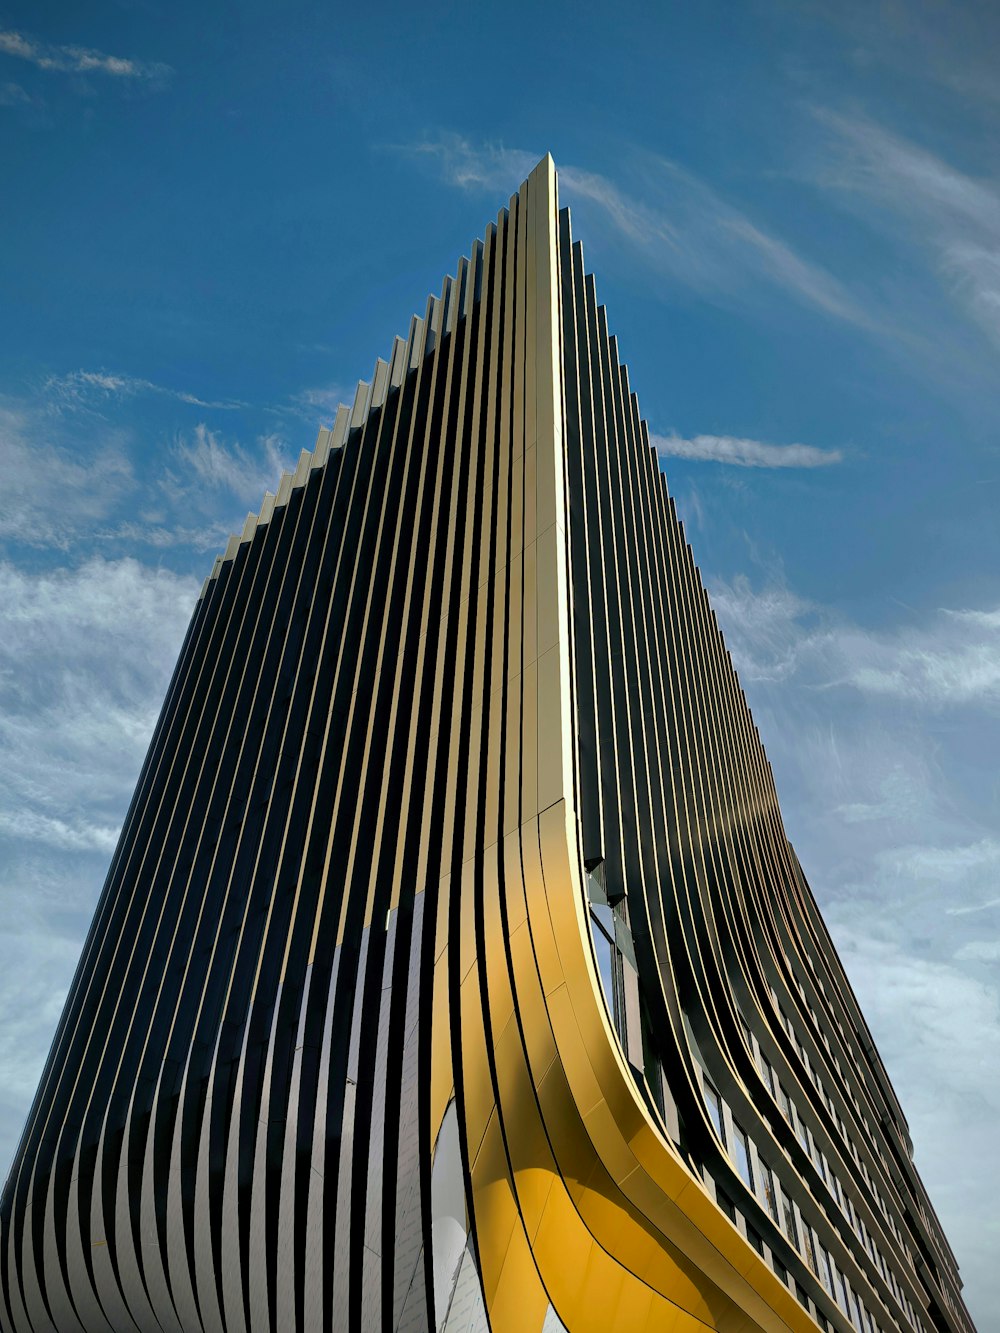 a very tall building with a yellow curved design